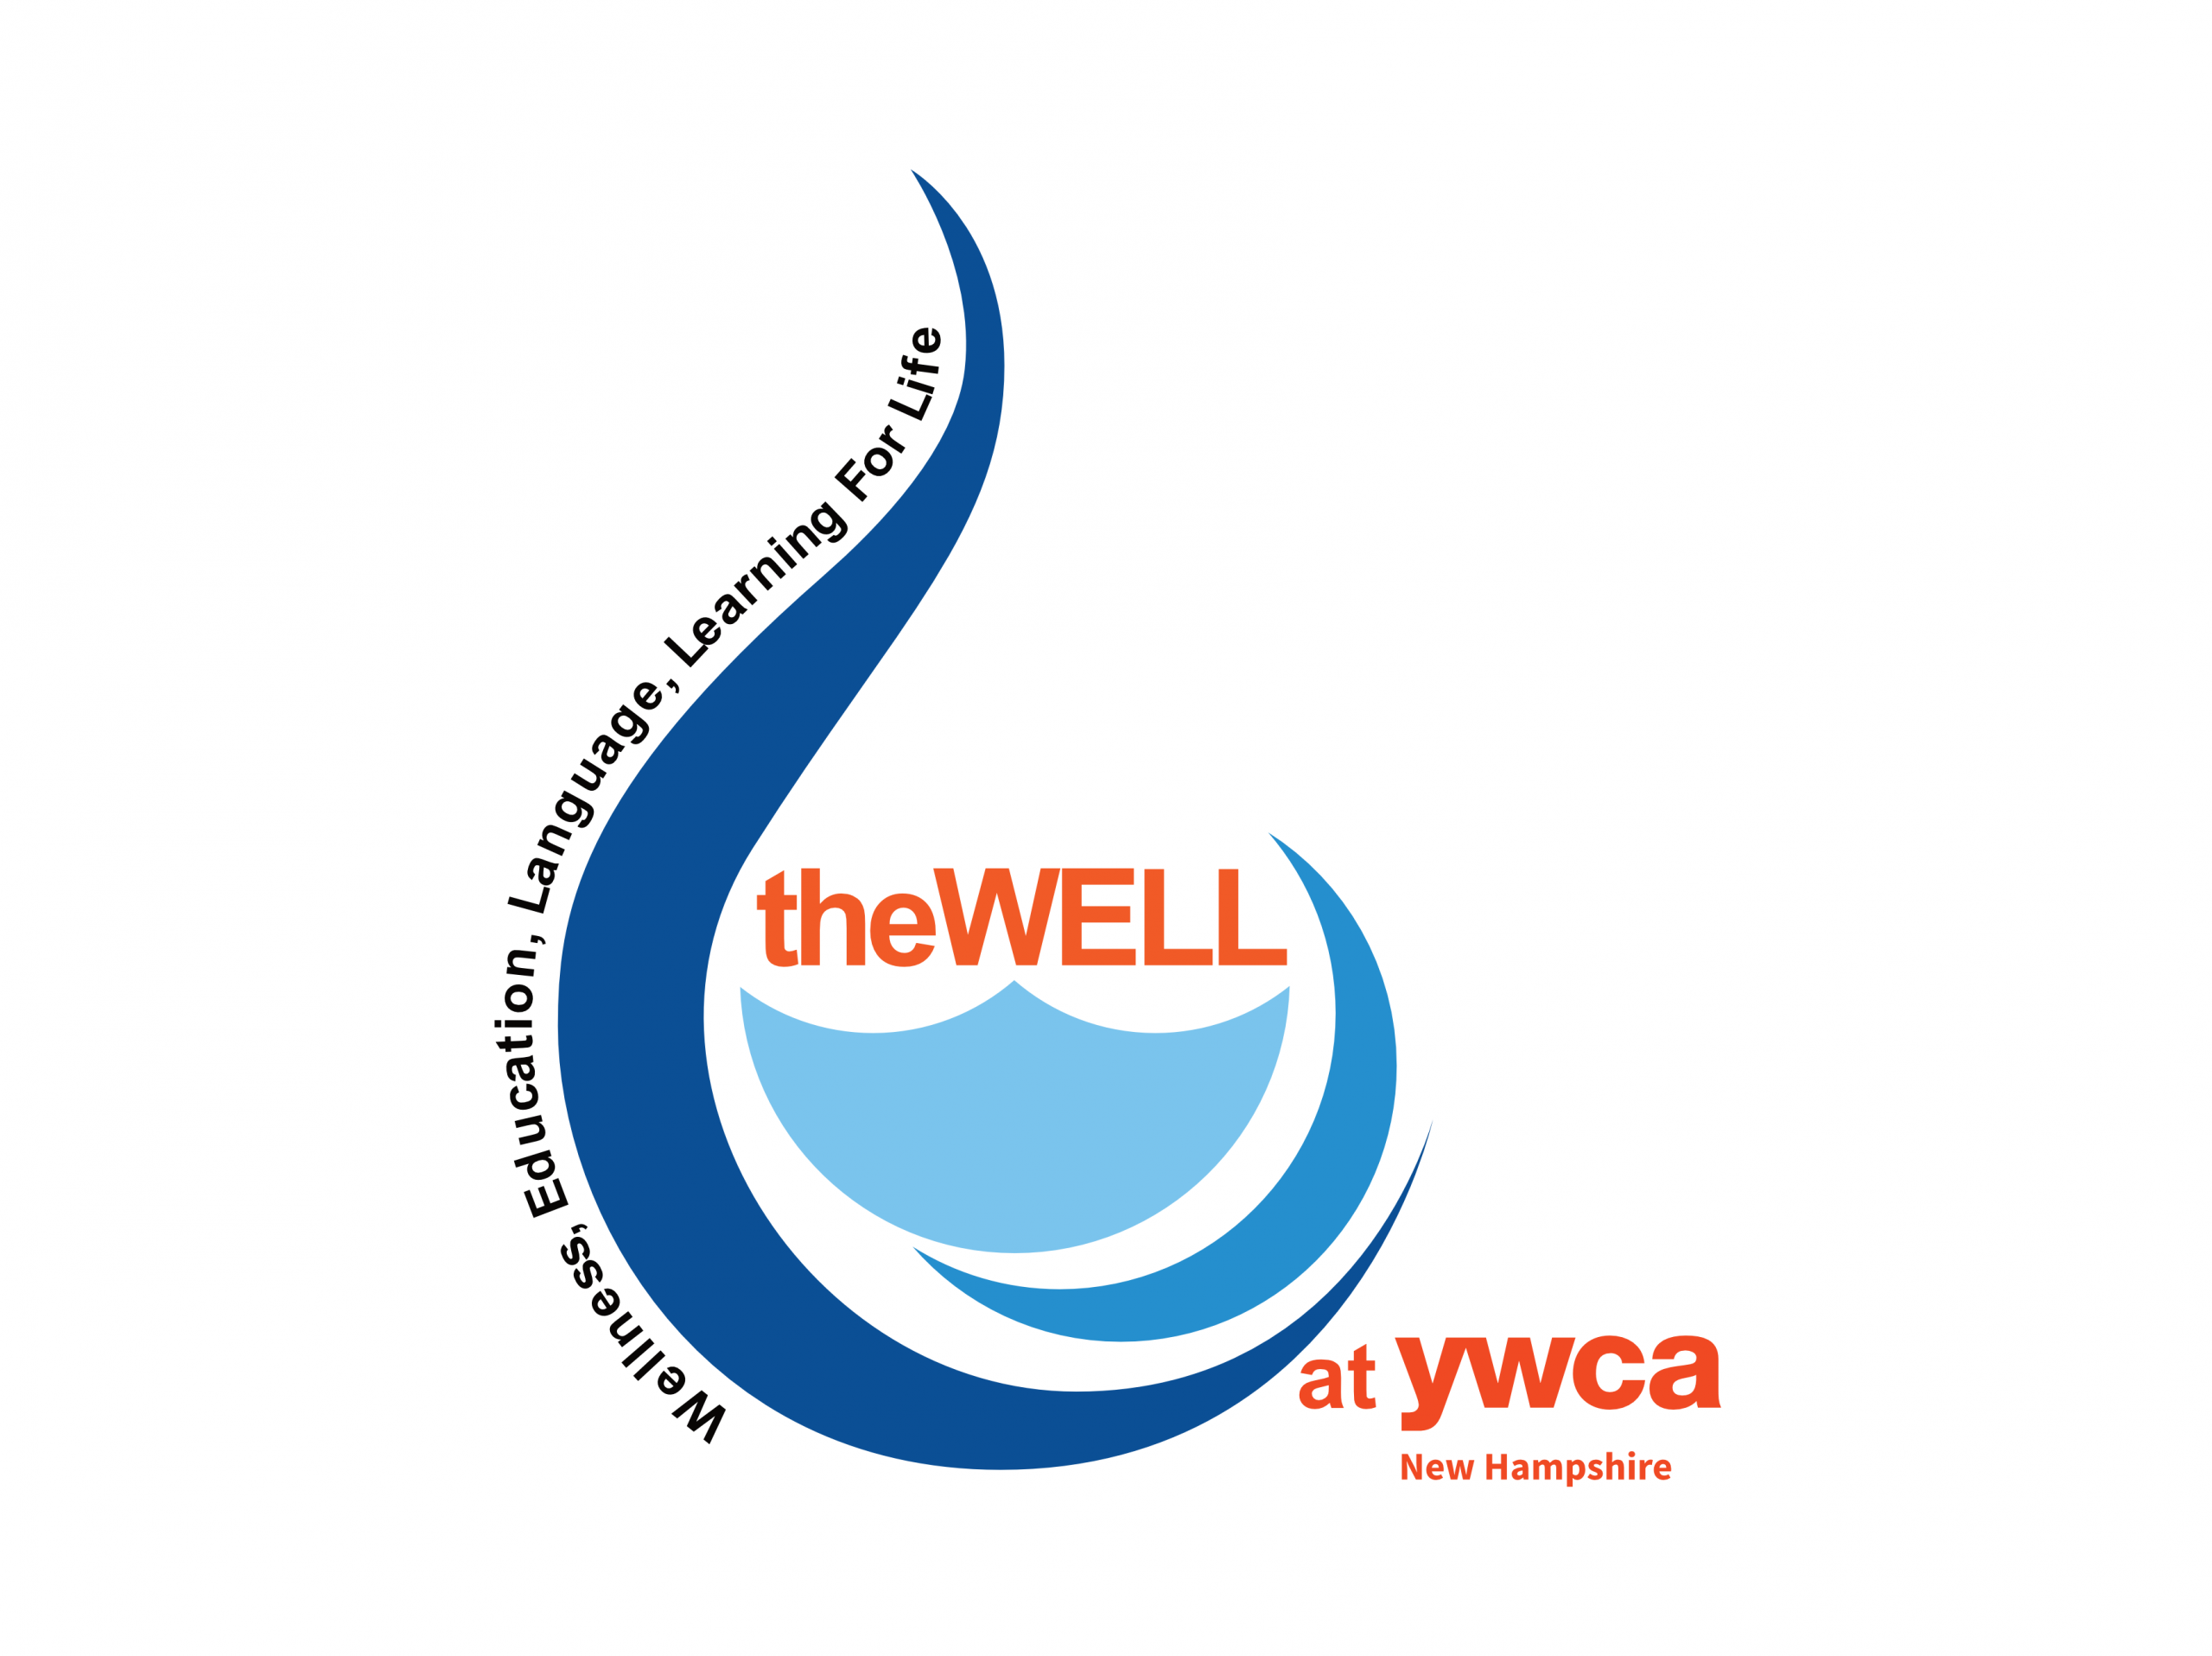 theWELL at YWCA